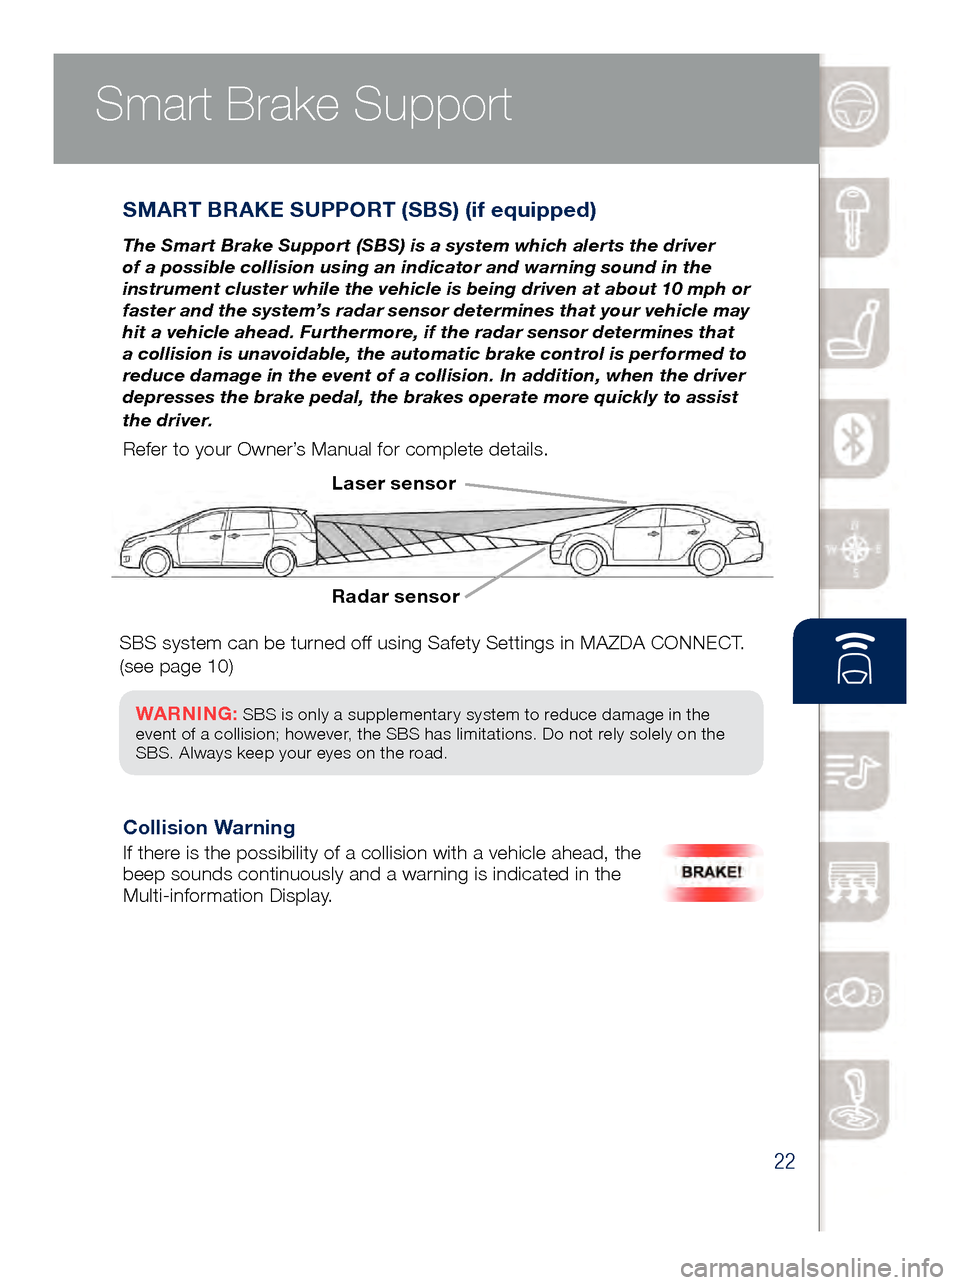 MAZDA MODEL 6 2017  Quick Start Guide (in English) 22
Smart Brake Support
SMART BRAKE SUPPORT (SBS) (if equipped)
The Smart Brake Support (SBS) is a system which alerts the driver 
of a possible collision using an indicator and warning sound in the 
i